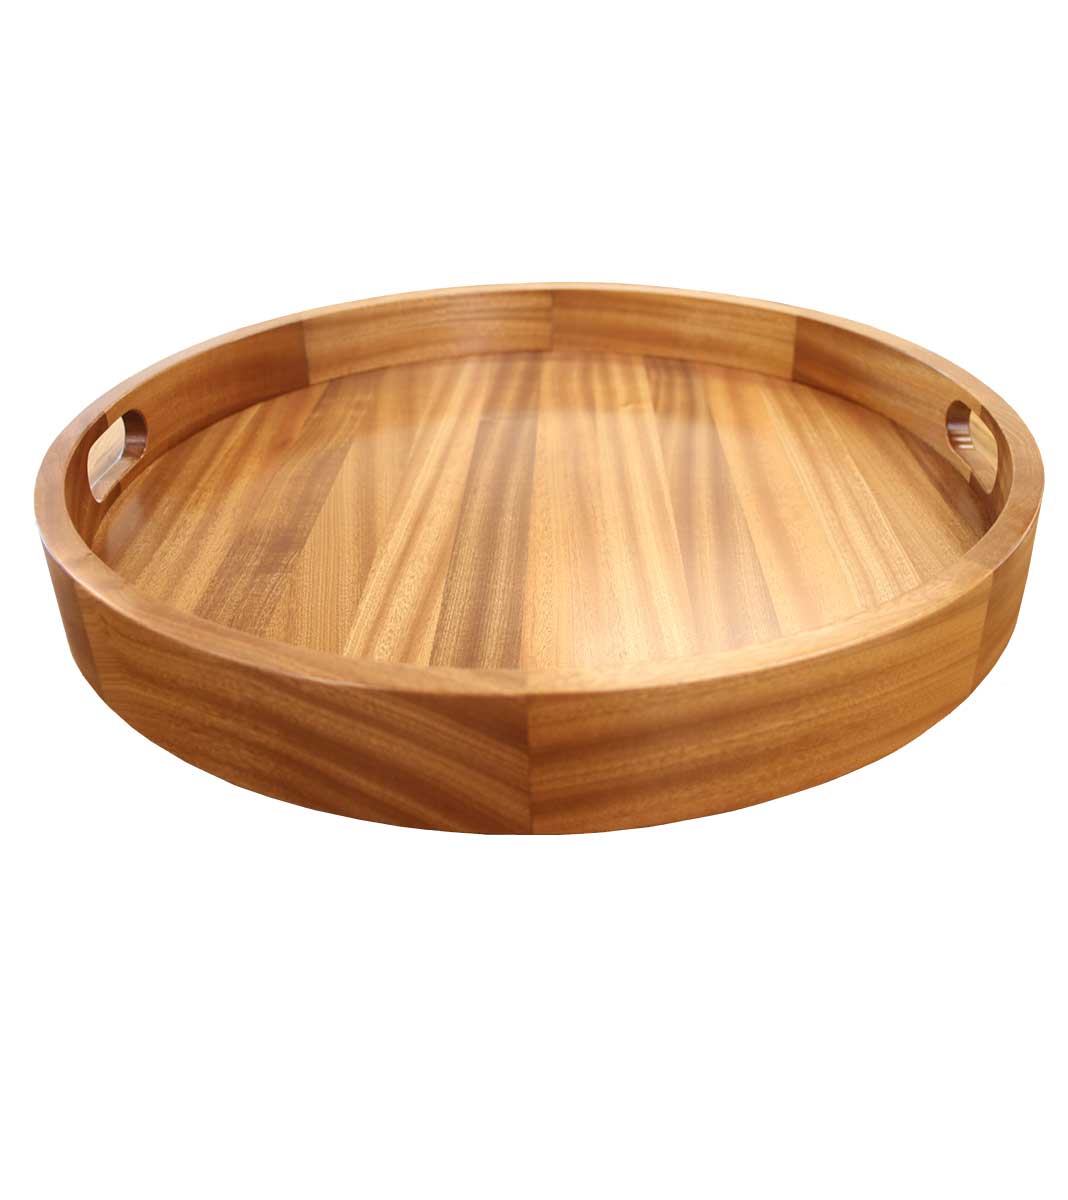 The Grothouse Sapele Wood Serving Tray is Perfect for Indoor and Outdoor Purposes